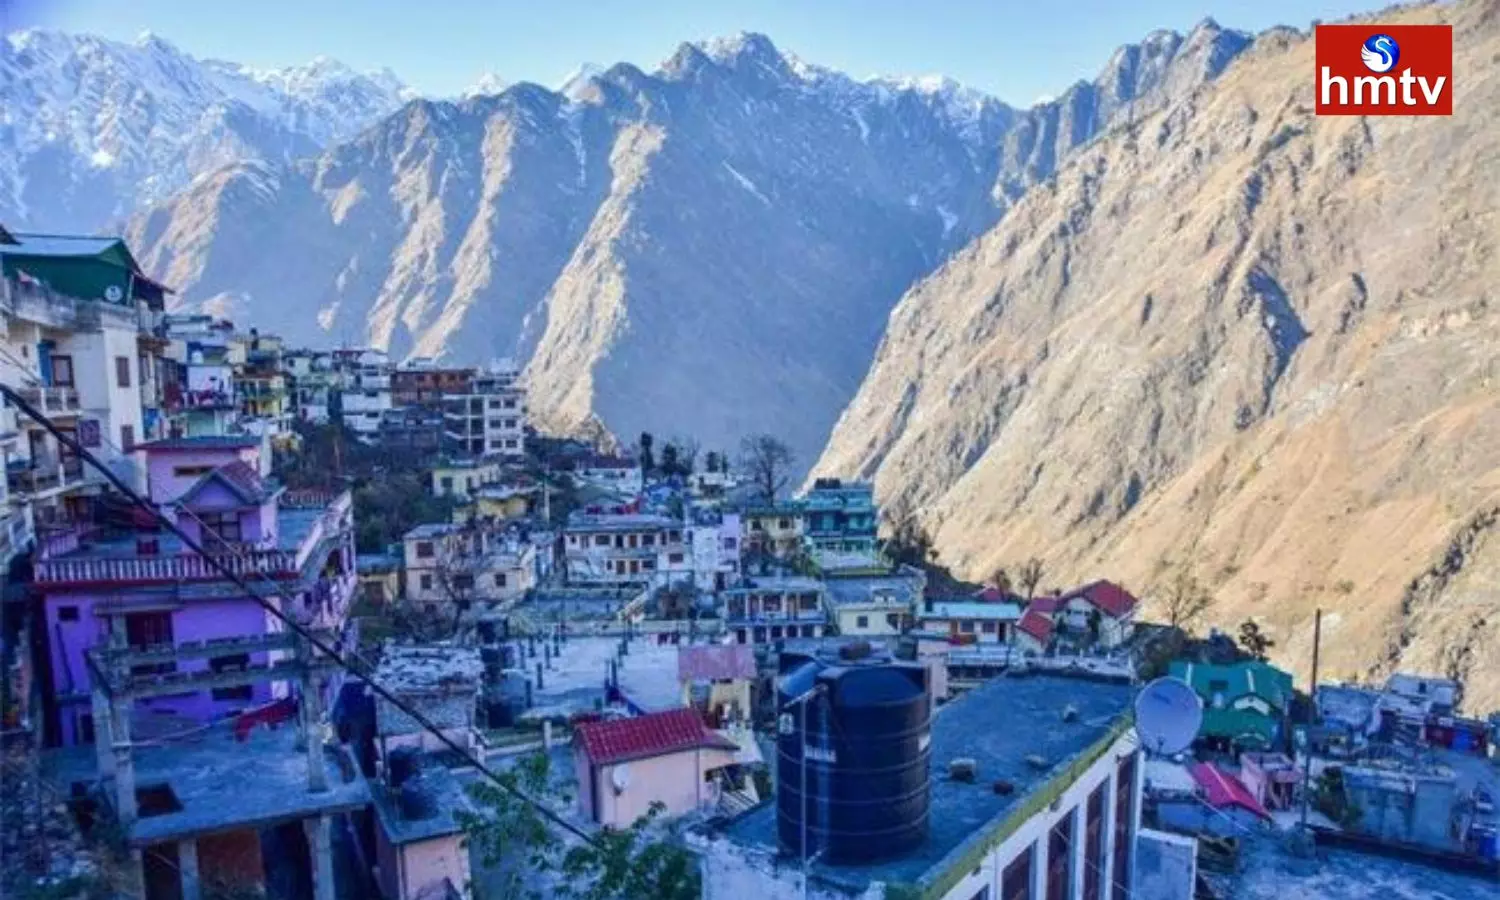 A Group of Scientists Will come to Joshimath in the Next Two Days